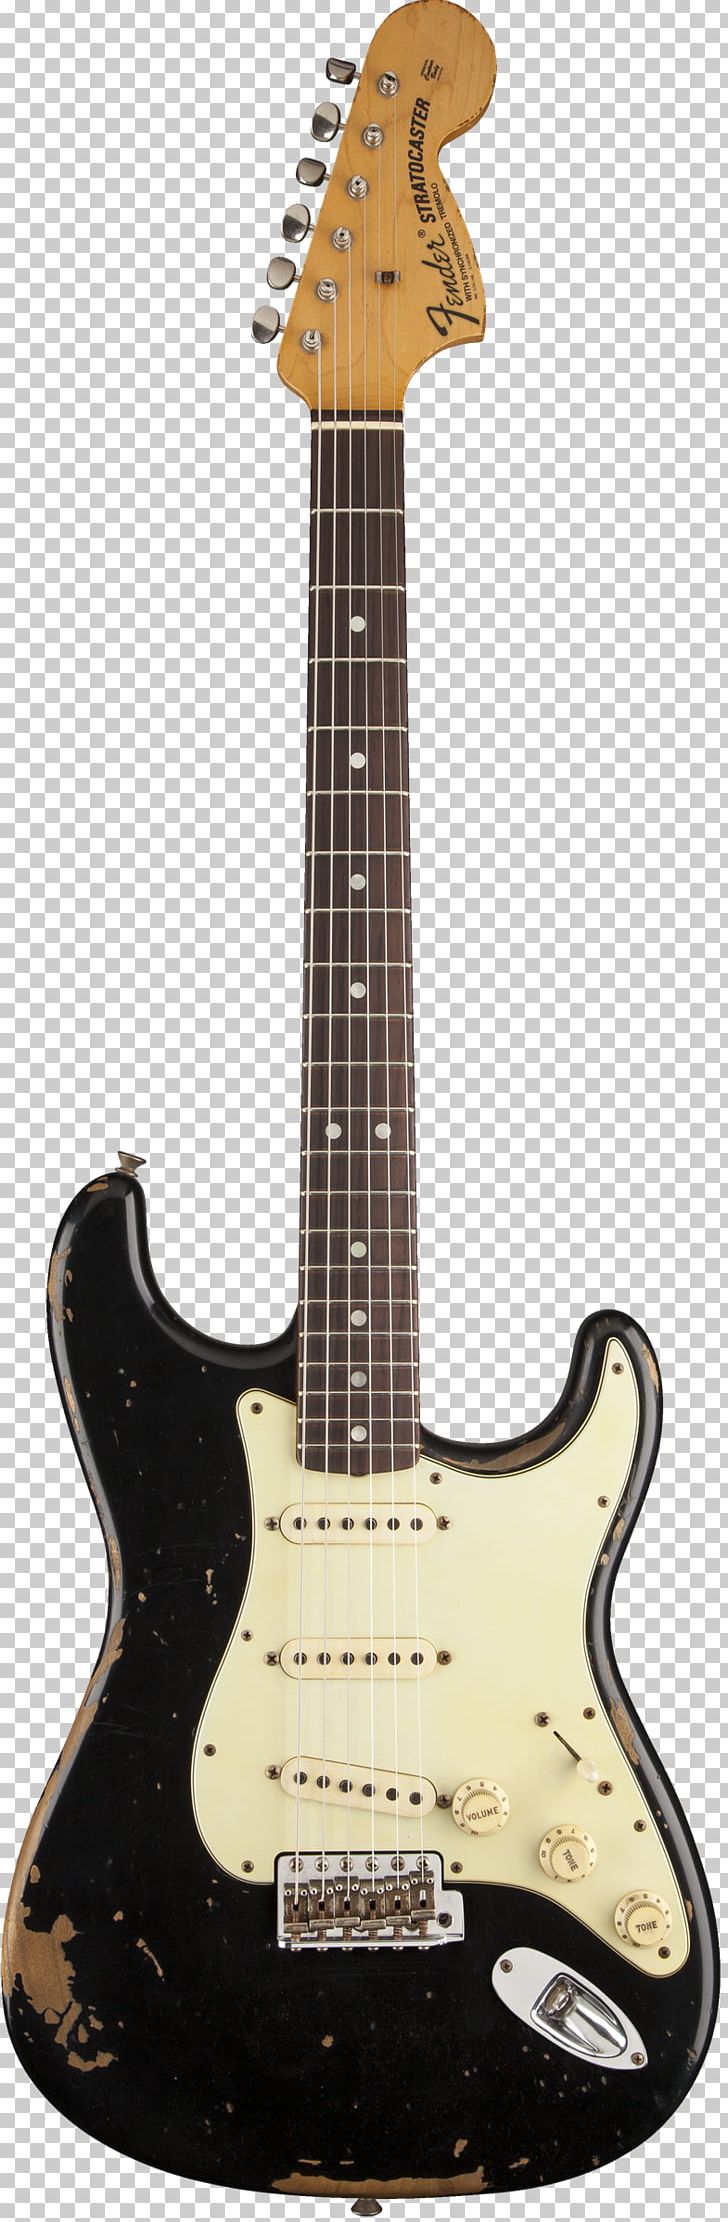 Fender Stratocaster Fender Musical Instruments Corporation Electric Guitar Fender Bullet Fender American Deluxe Series PNG, Clipart, Acoustic Electric Guitar, Bass Guitar, Burning Guitar, Fender Telecaster Thinline, Fingerboard Free PNG Download